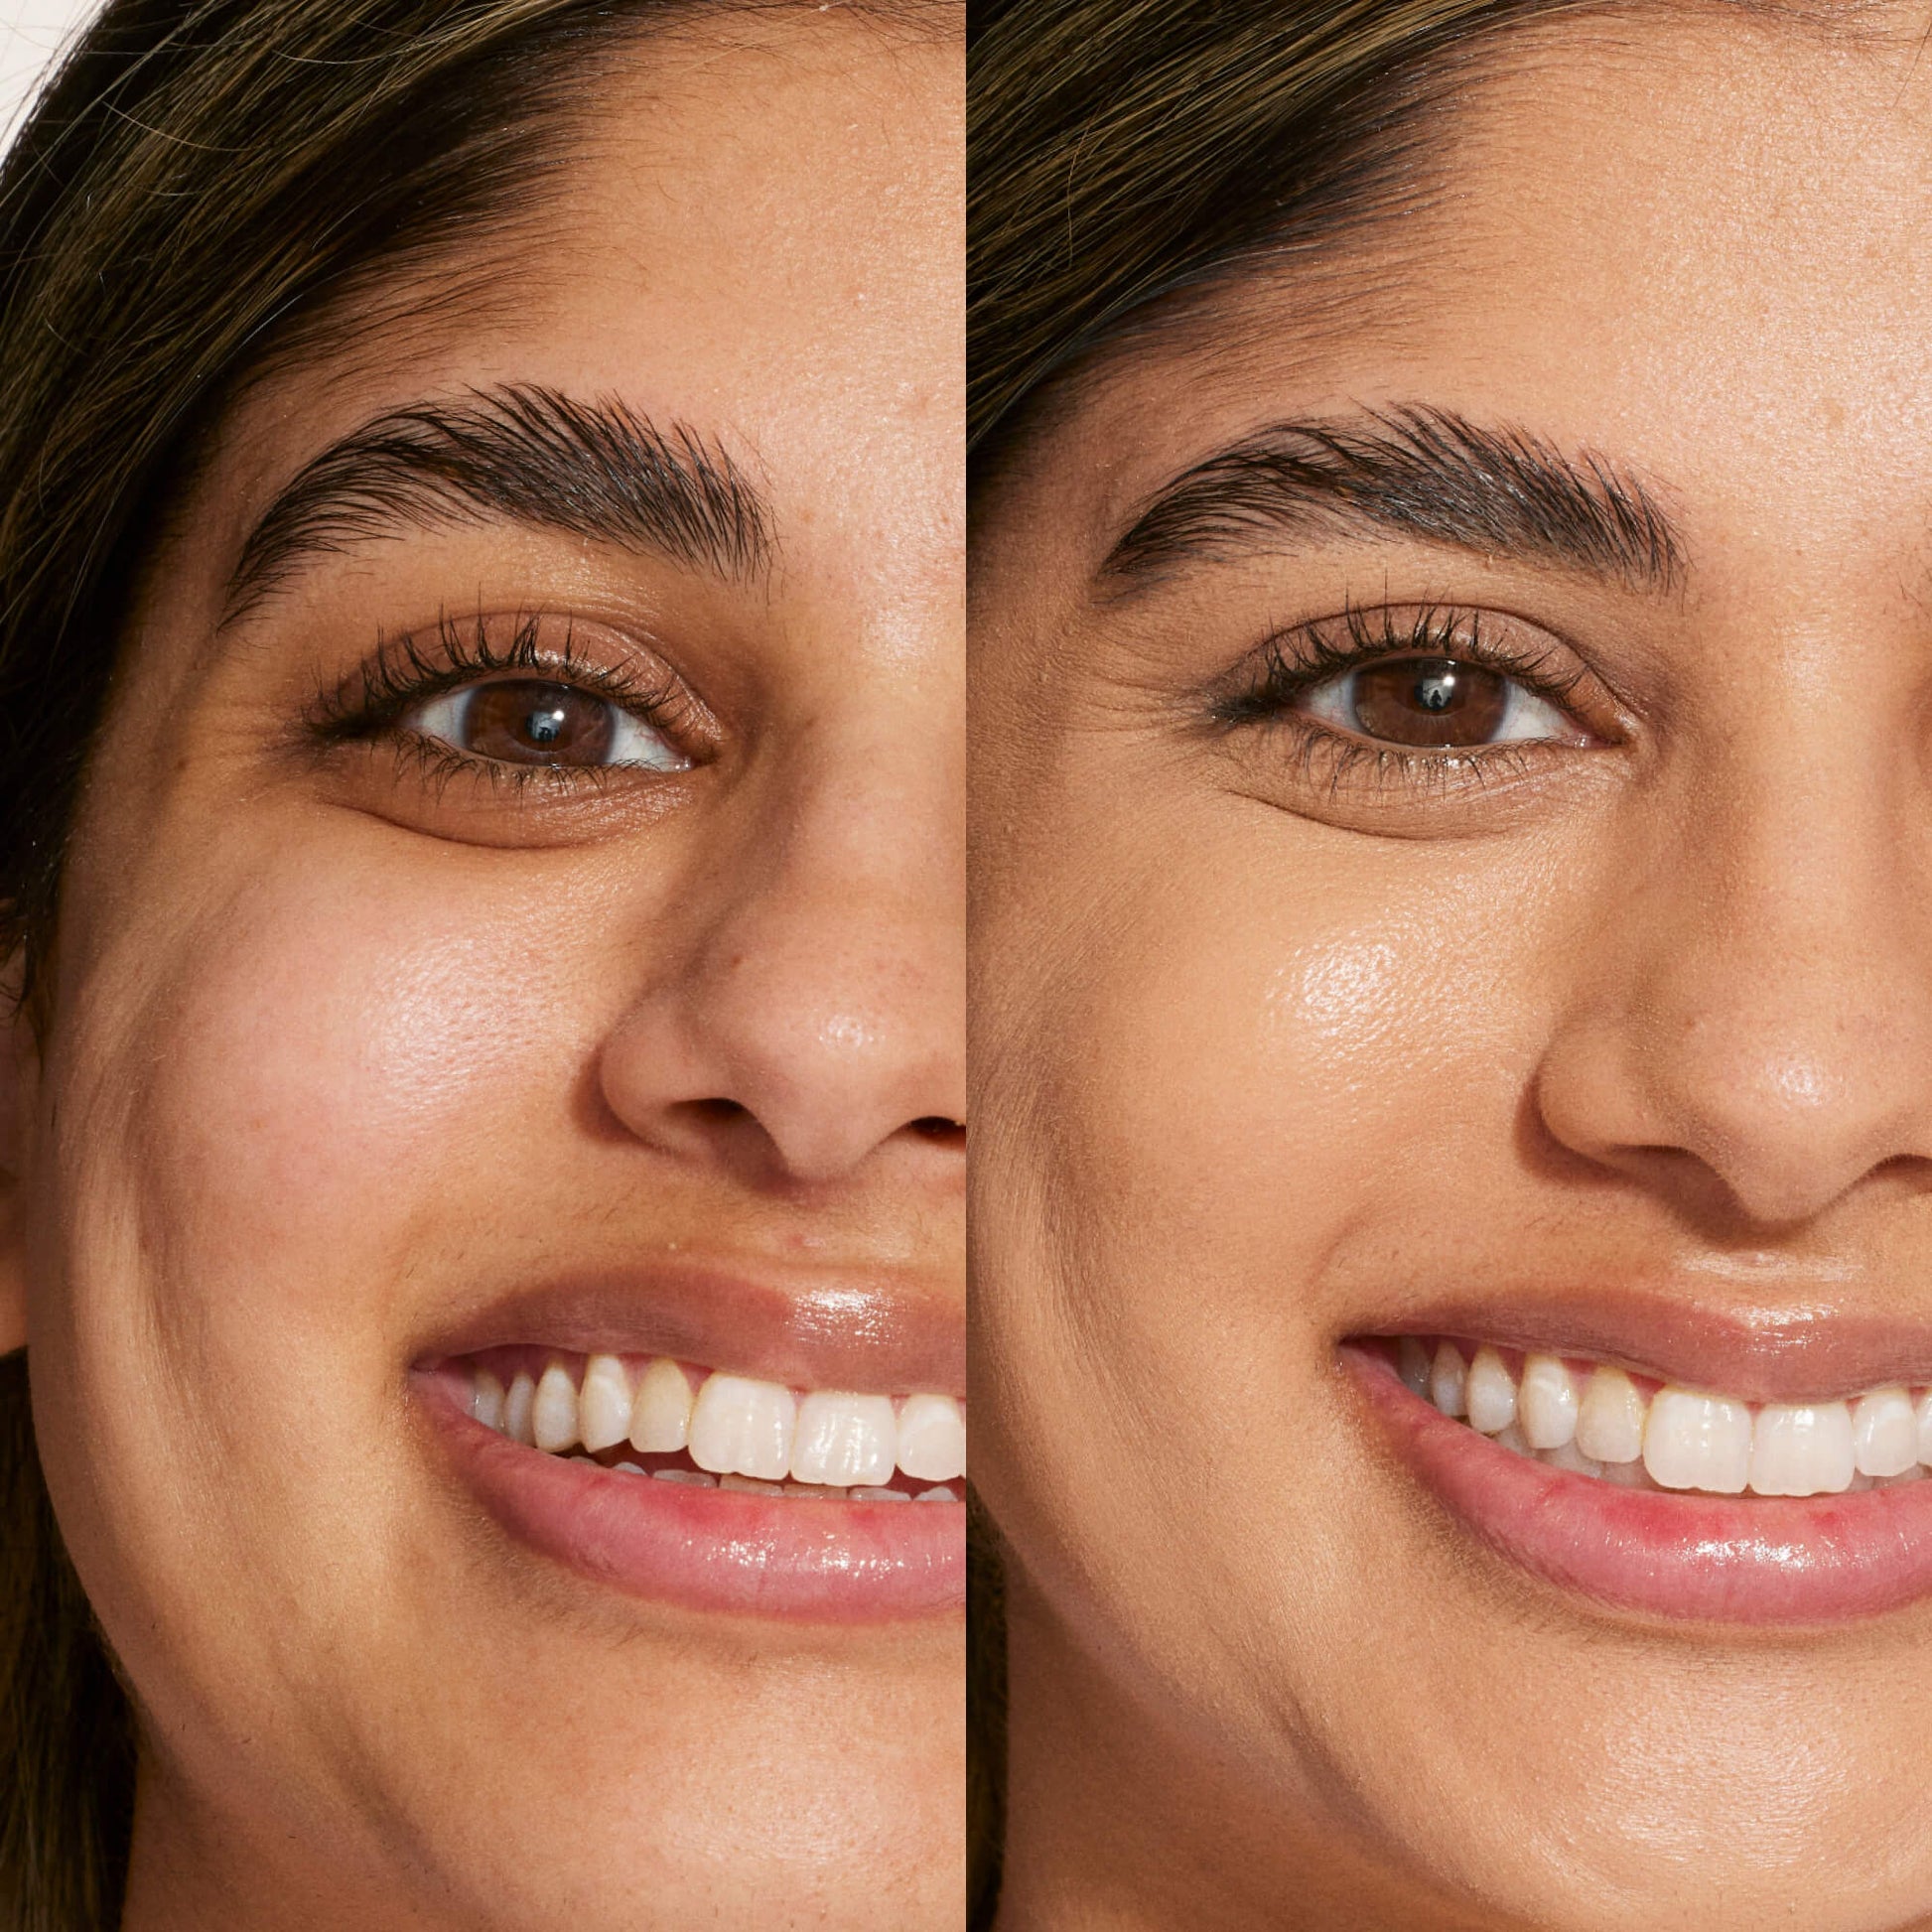 A person's face before and after using Tower 28 Beauty's Swipe Serum Concealer in shade 10.0 NOHO to cover up dark circles, blemishes, and discoloration